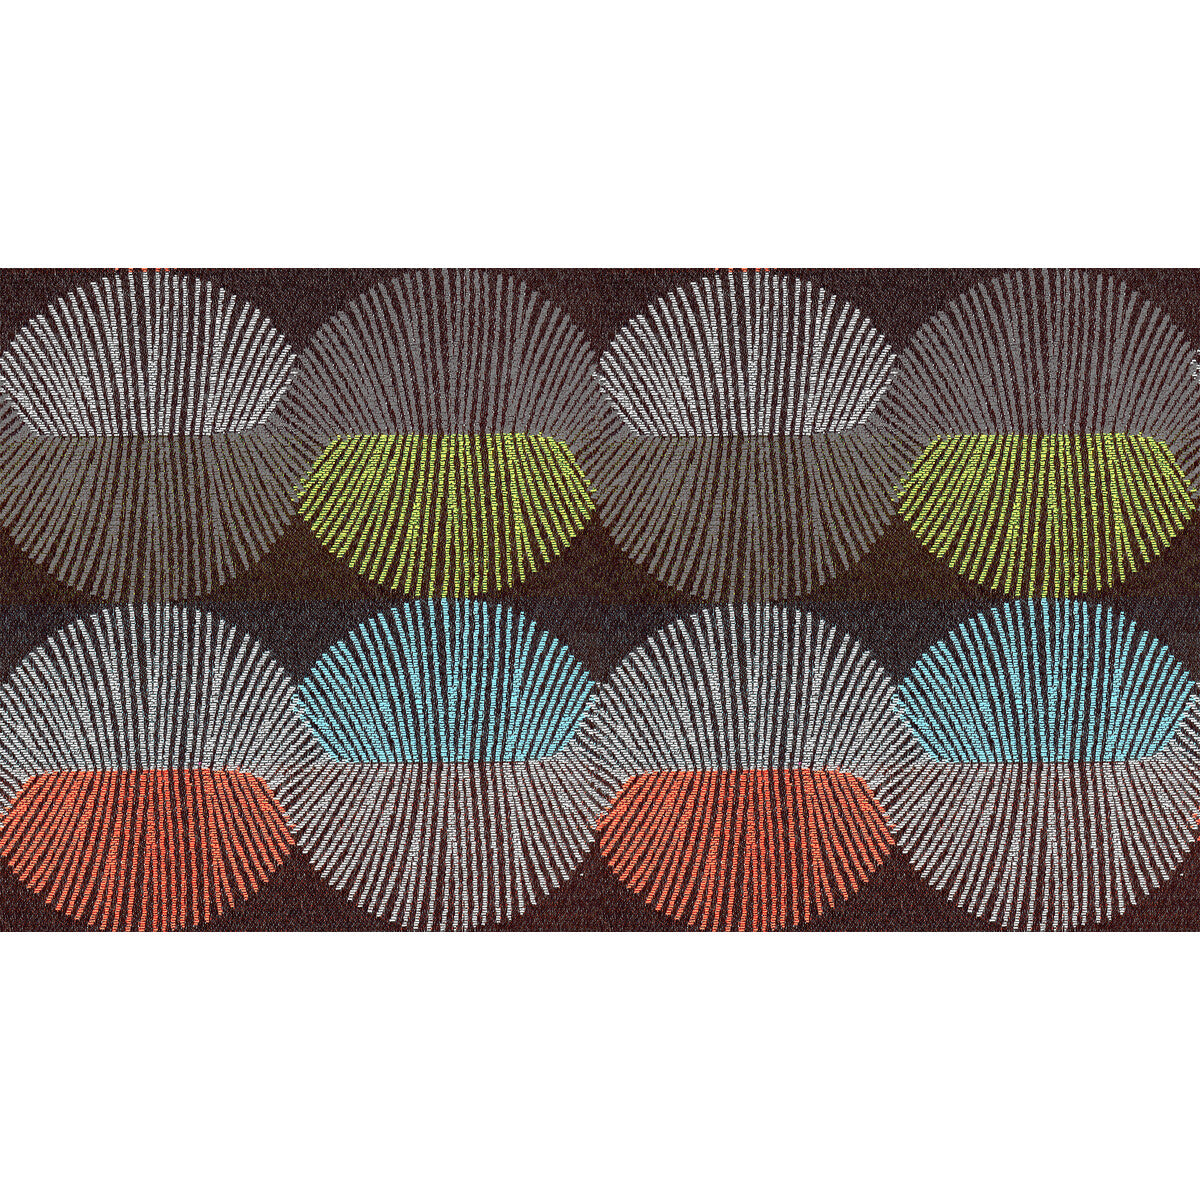 Match Maker fabric in pop color - pattern 34650.814.0 - by Kravet Contract in the Gis collection